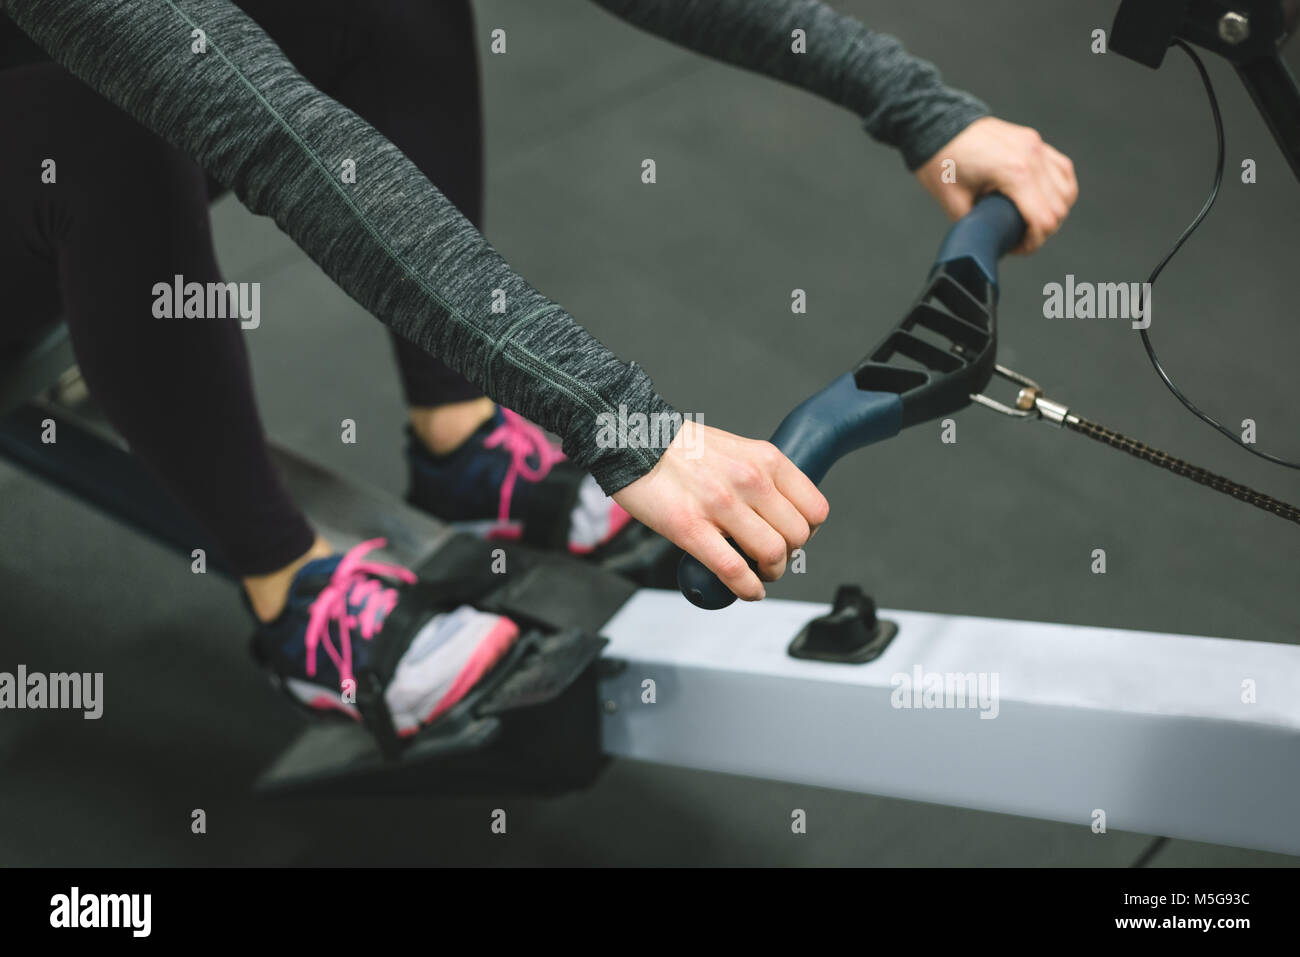 Muscular woman exercising on rowing machine Stock Photo